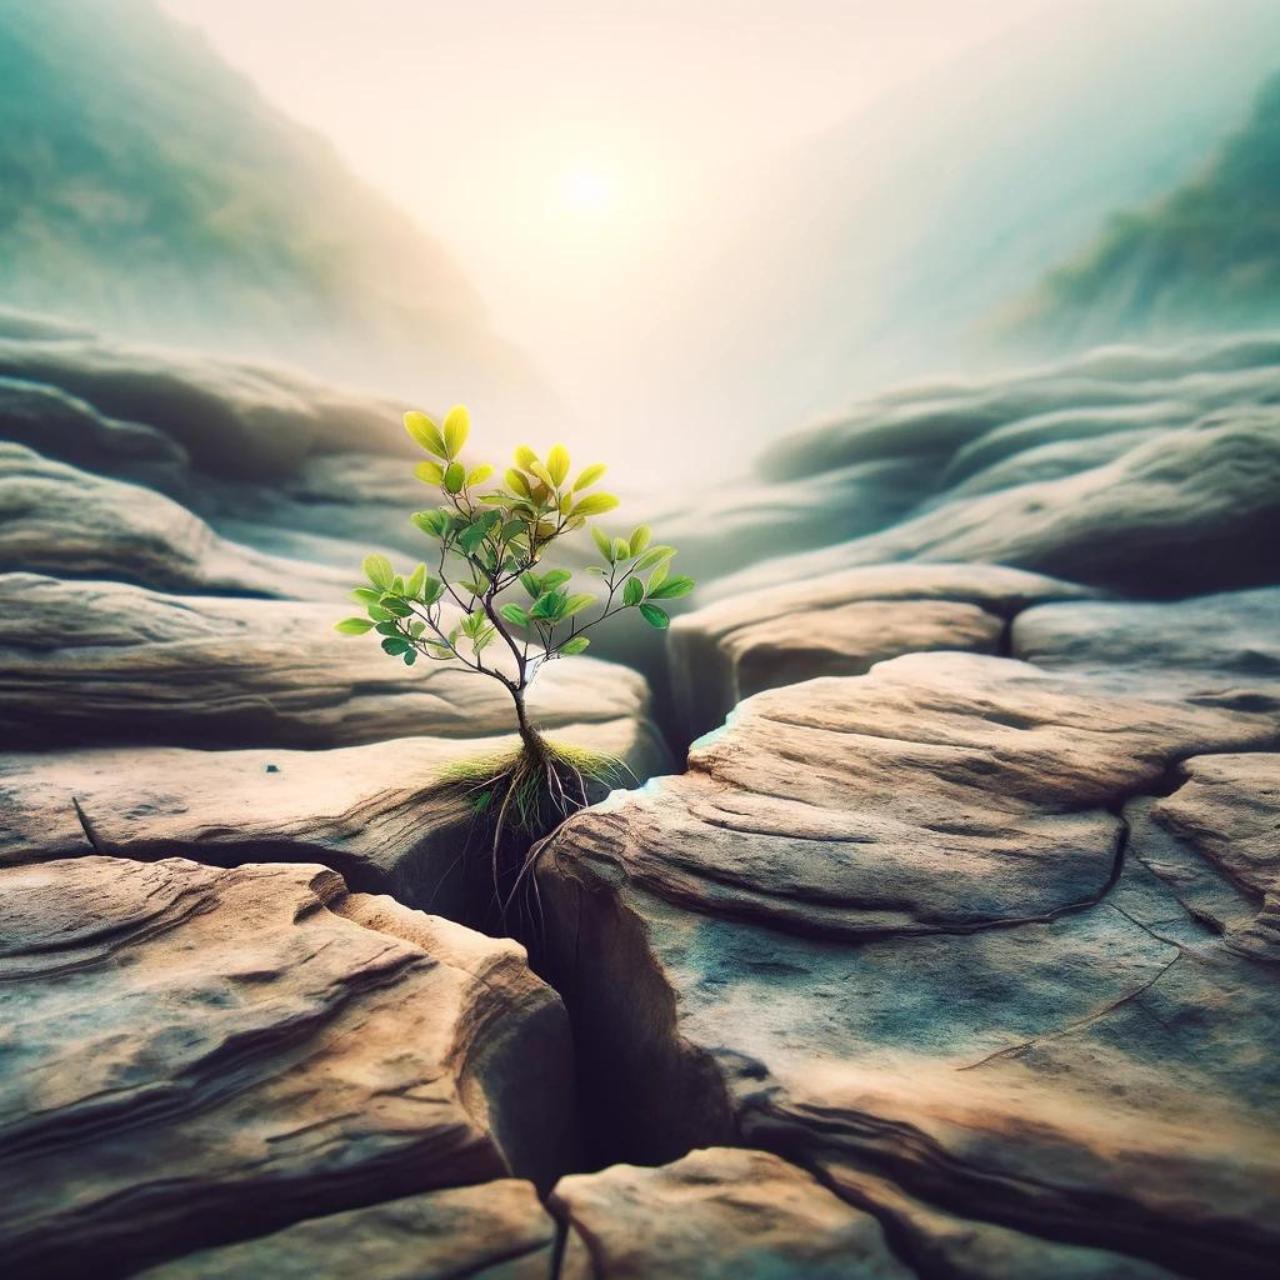 An AI generated image of a sapling emerging through rocky terrain, its persistence highlighted in a gentle, whimsical style.